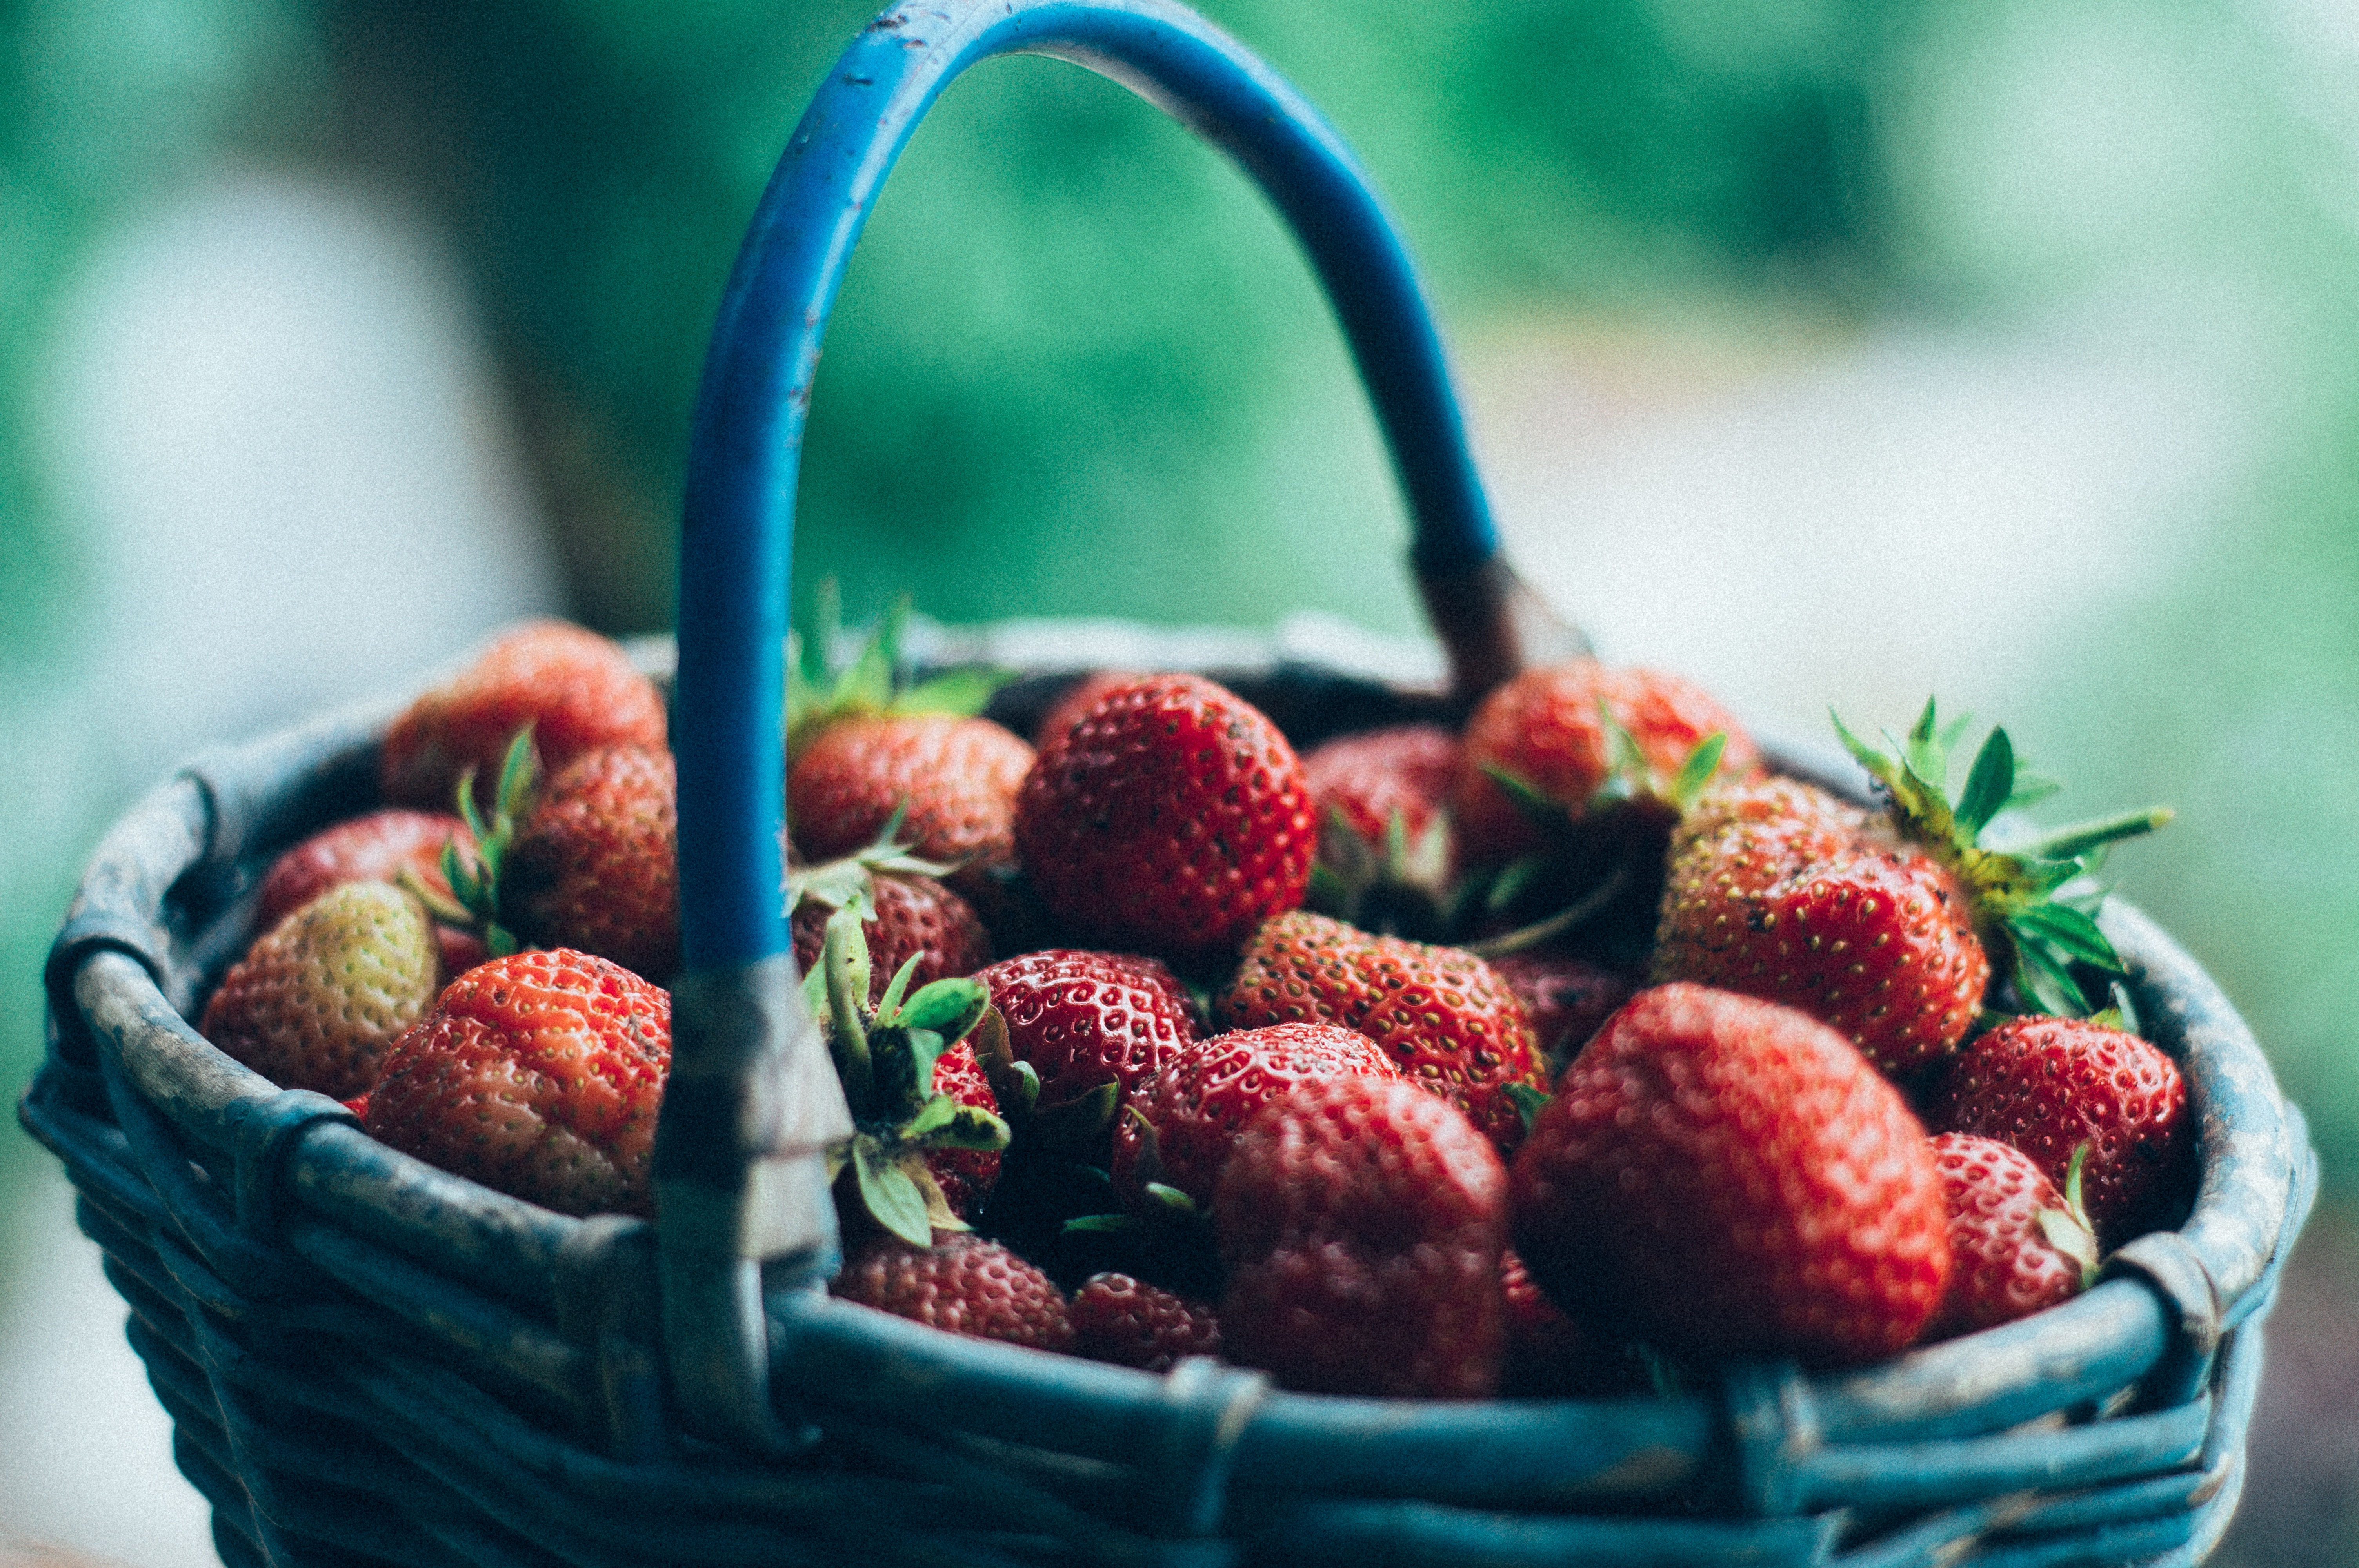 Close-up photography of a basket filled with strawberries